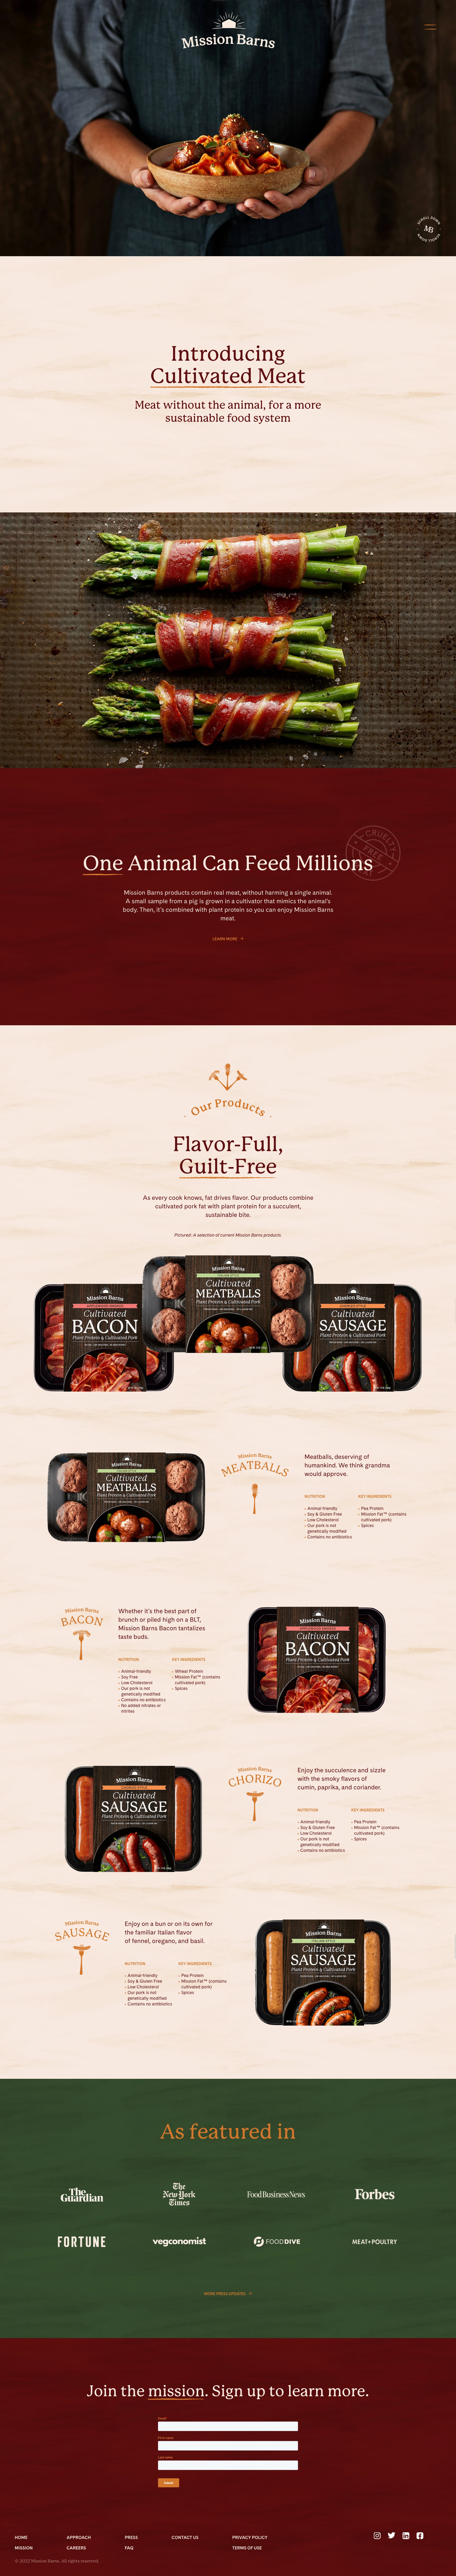 Mission Barns Landing Page Example: We're making meat that's better for you and the world.